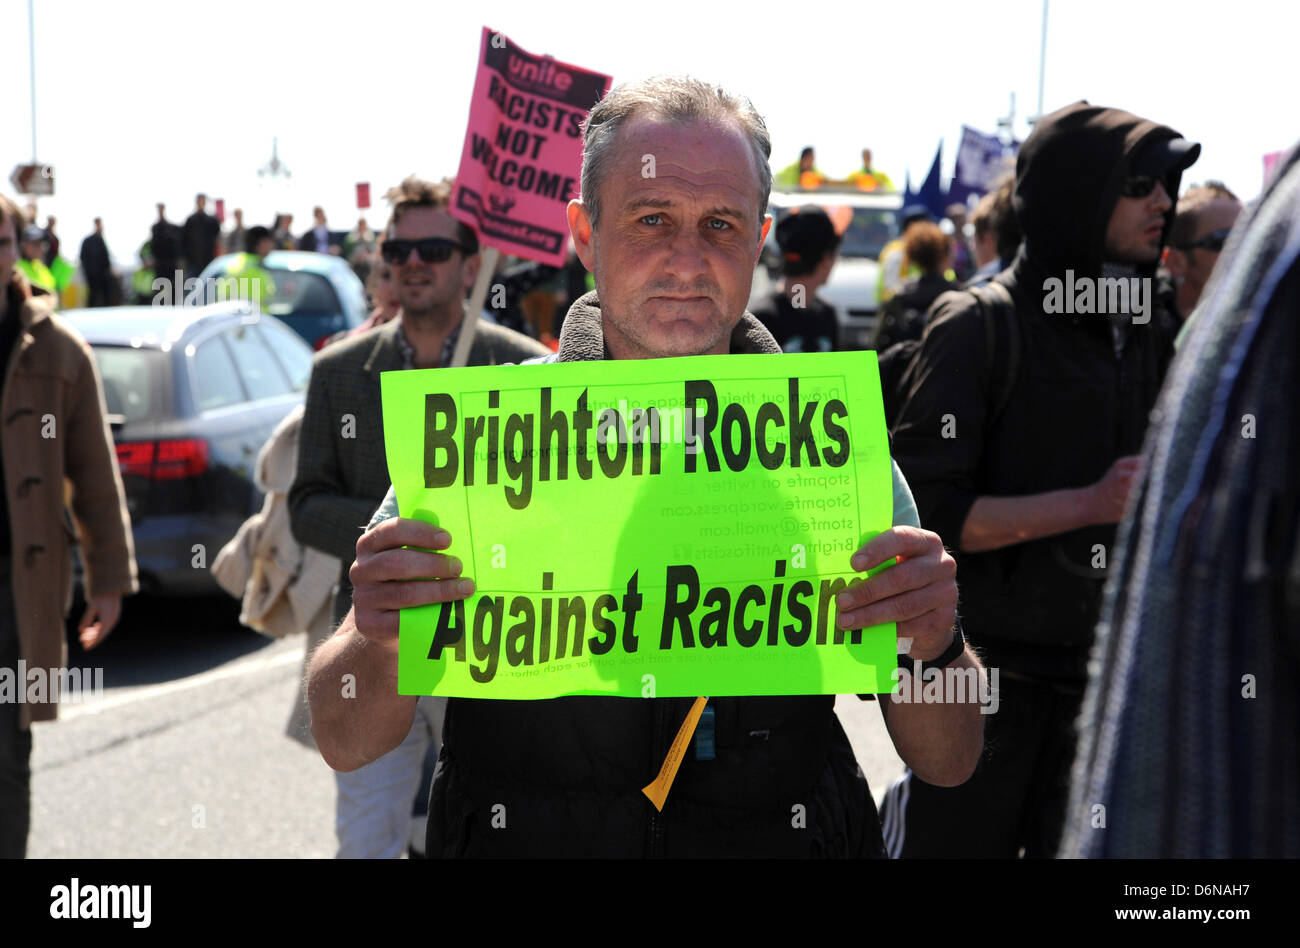 Brighton Sussex UK 21st April 2013 - Anti Fascists try to disrupt a March for England procession along Brighton seafront today . The parade was heavily policed as they tried to keep the two groups apart Photograph taken by Simon Dack/Alamy Live News Stock Photo